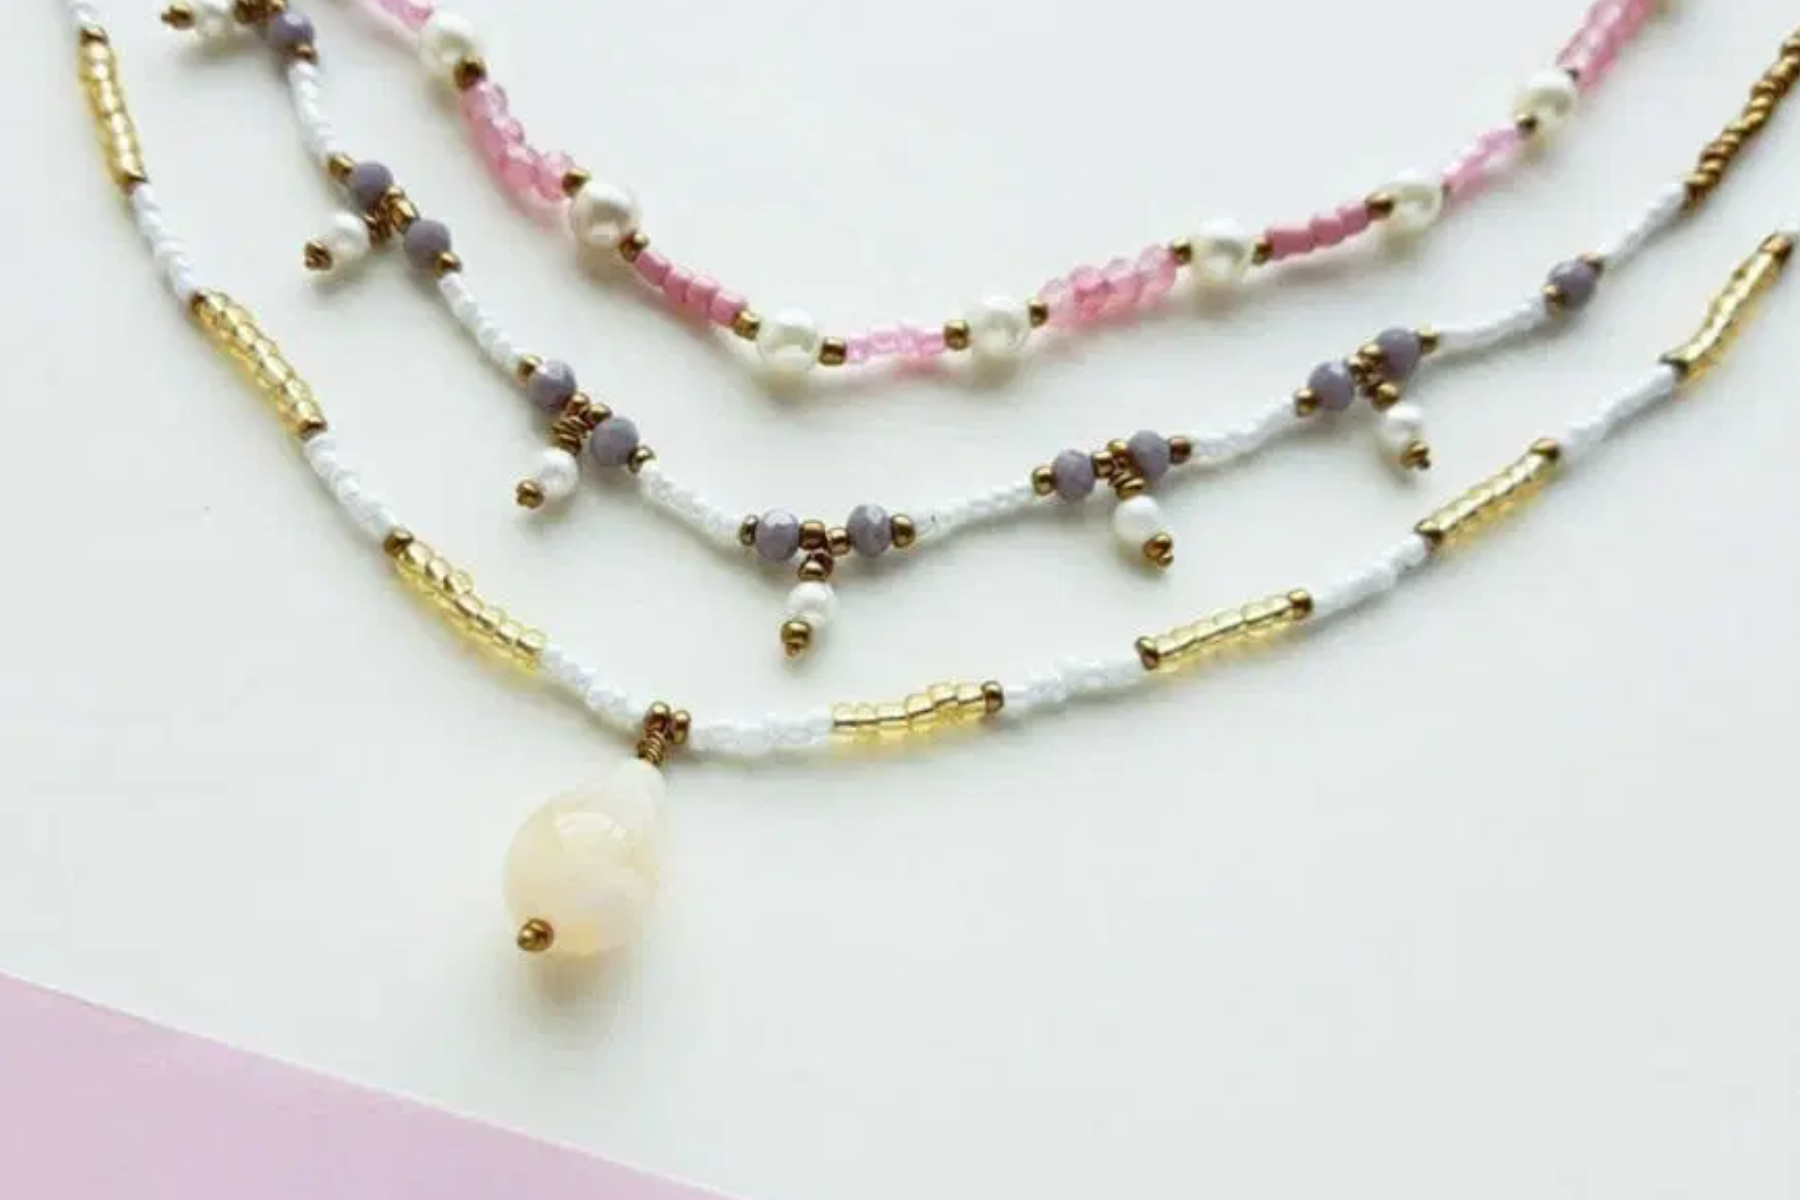 Handmade Beaded Necklaces - Handcrafted With Love